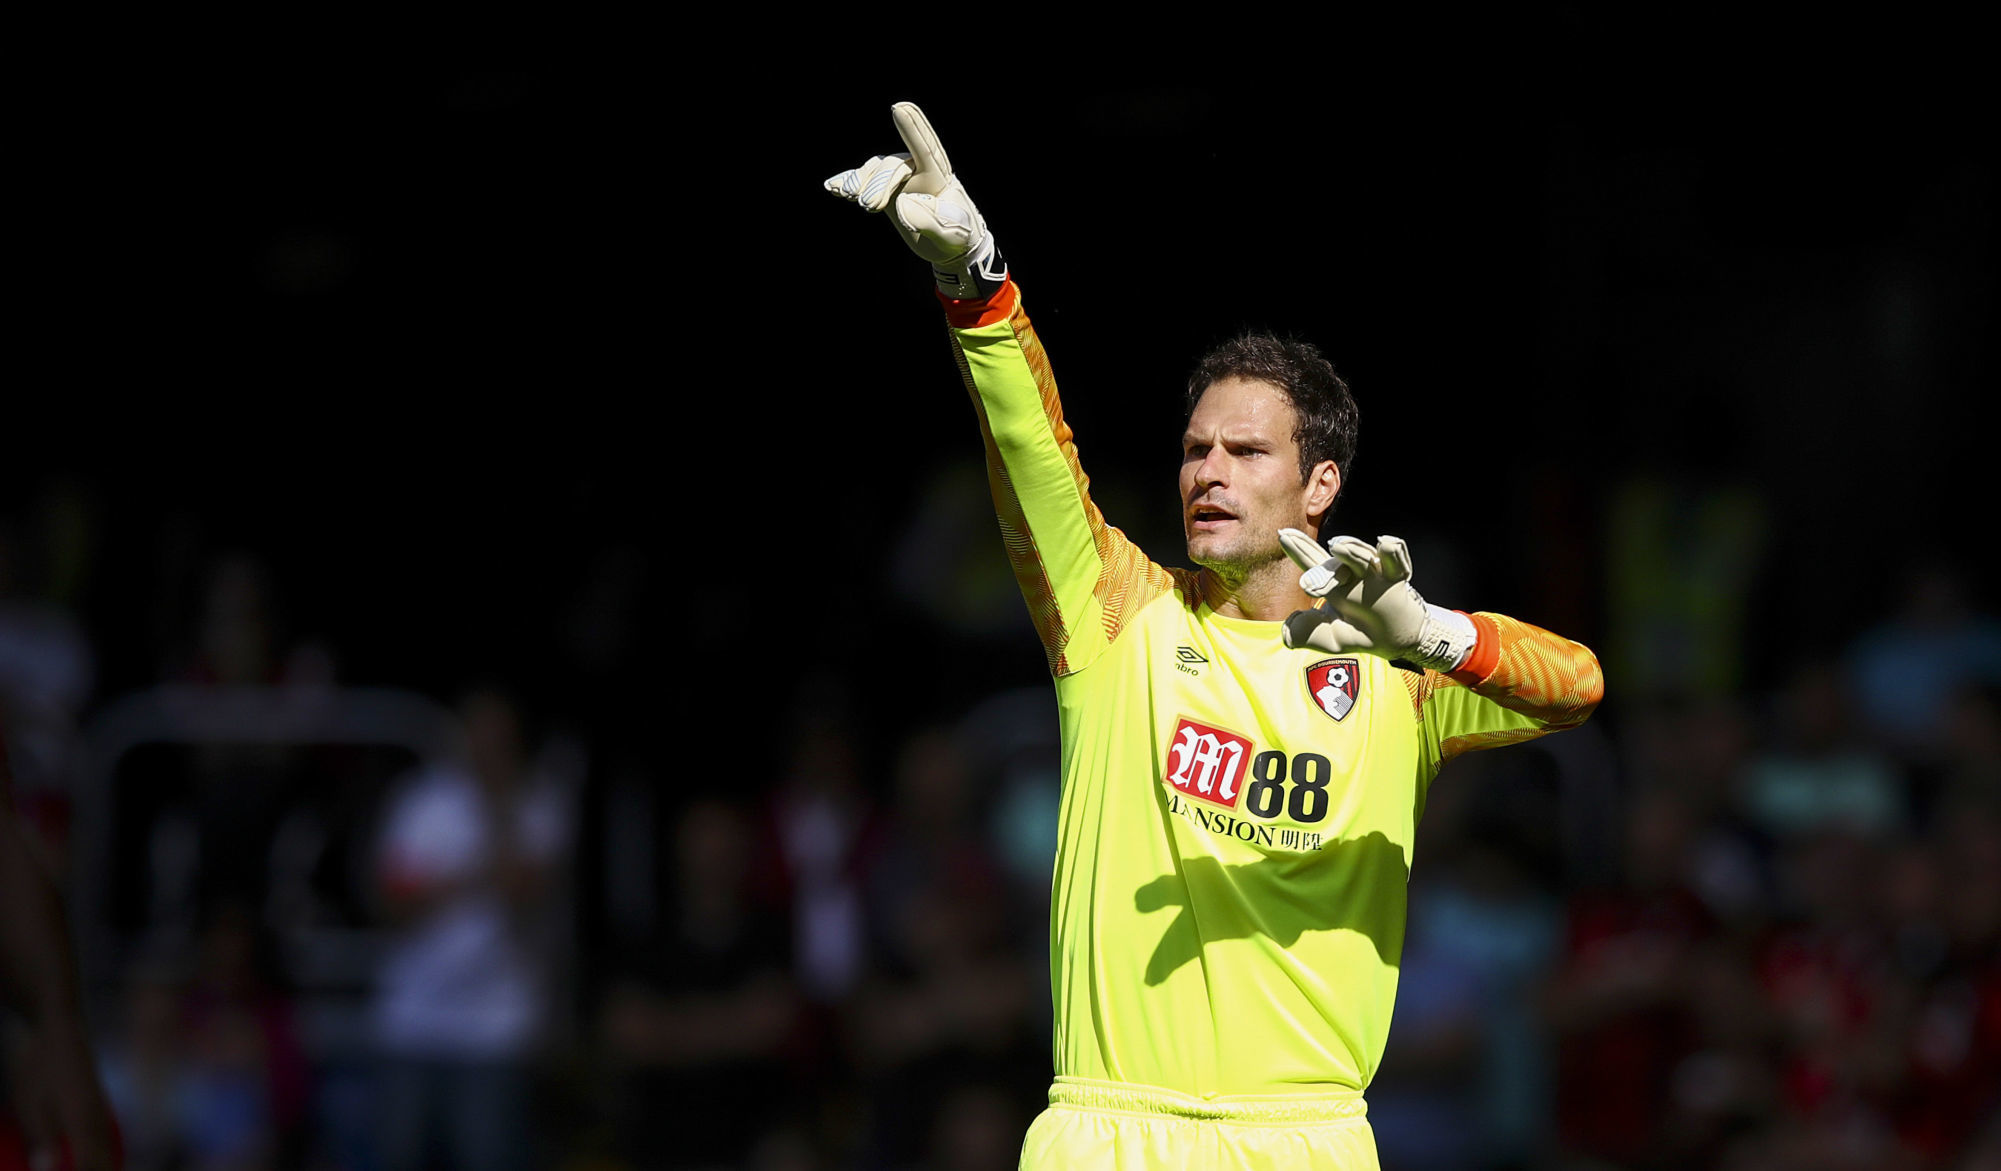 Bournemouth goalkeeper Asmir Begovic during the Premier League match between Chelsea and Bournemmouth at Stamford Bridge, London, on September 1st, 2018.
Photo : PA Images / Icon Sport